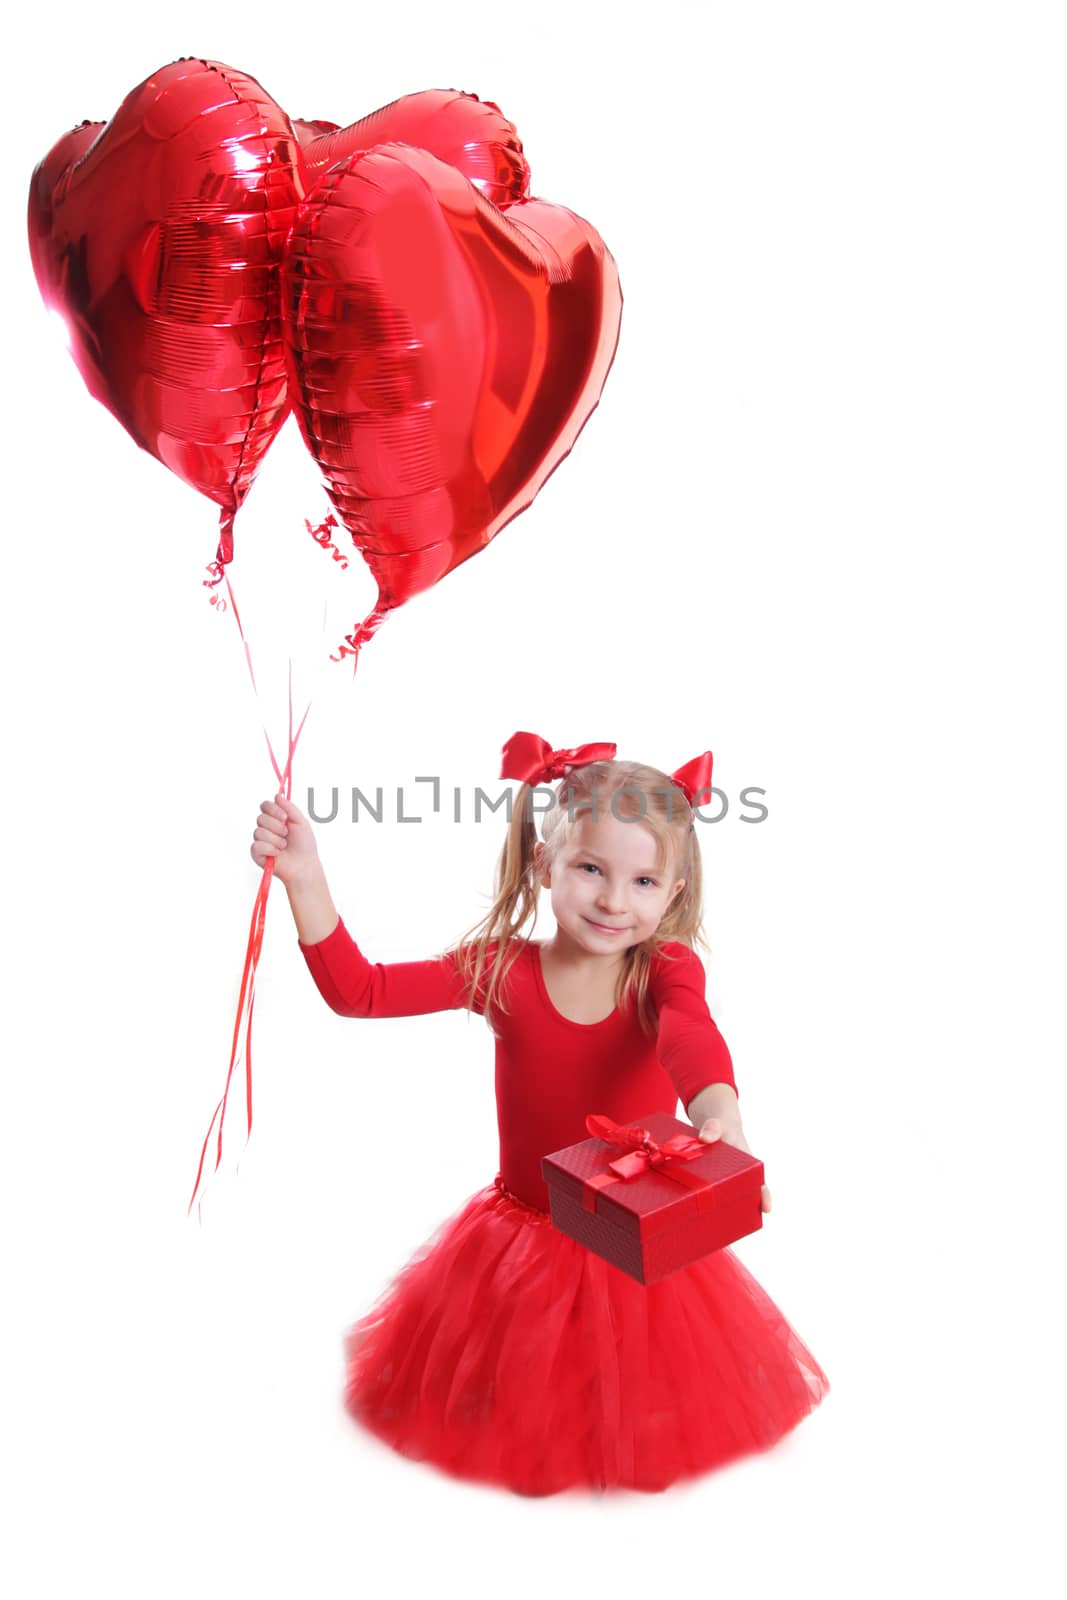 Girl in red with heart-shaped balloons and gift by Angel_a